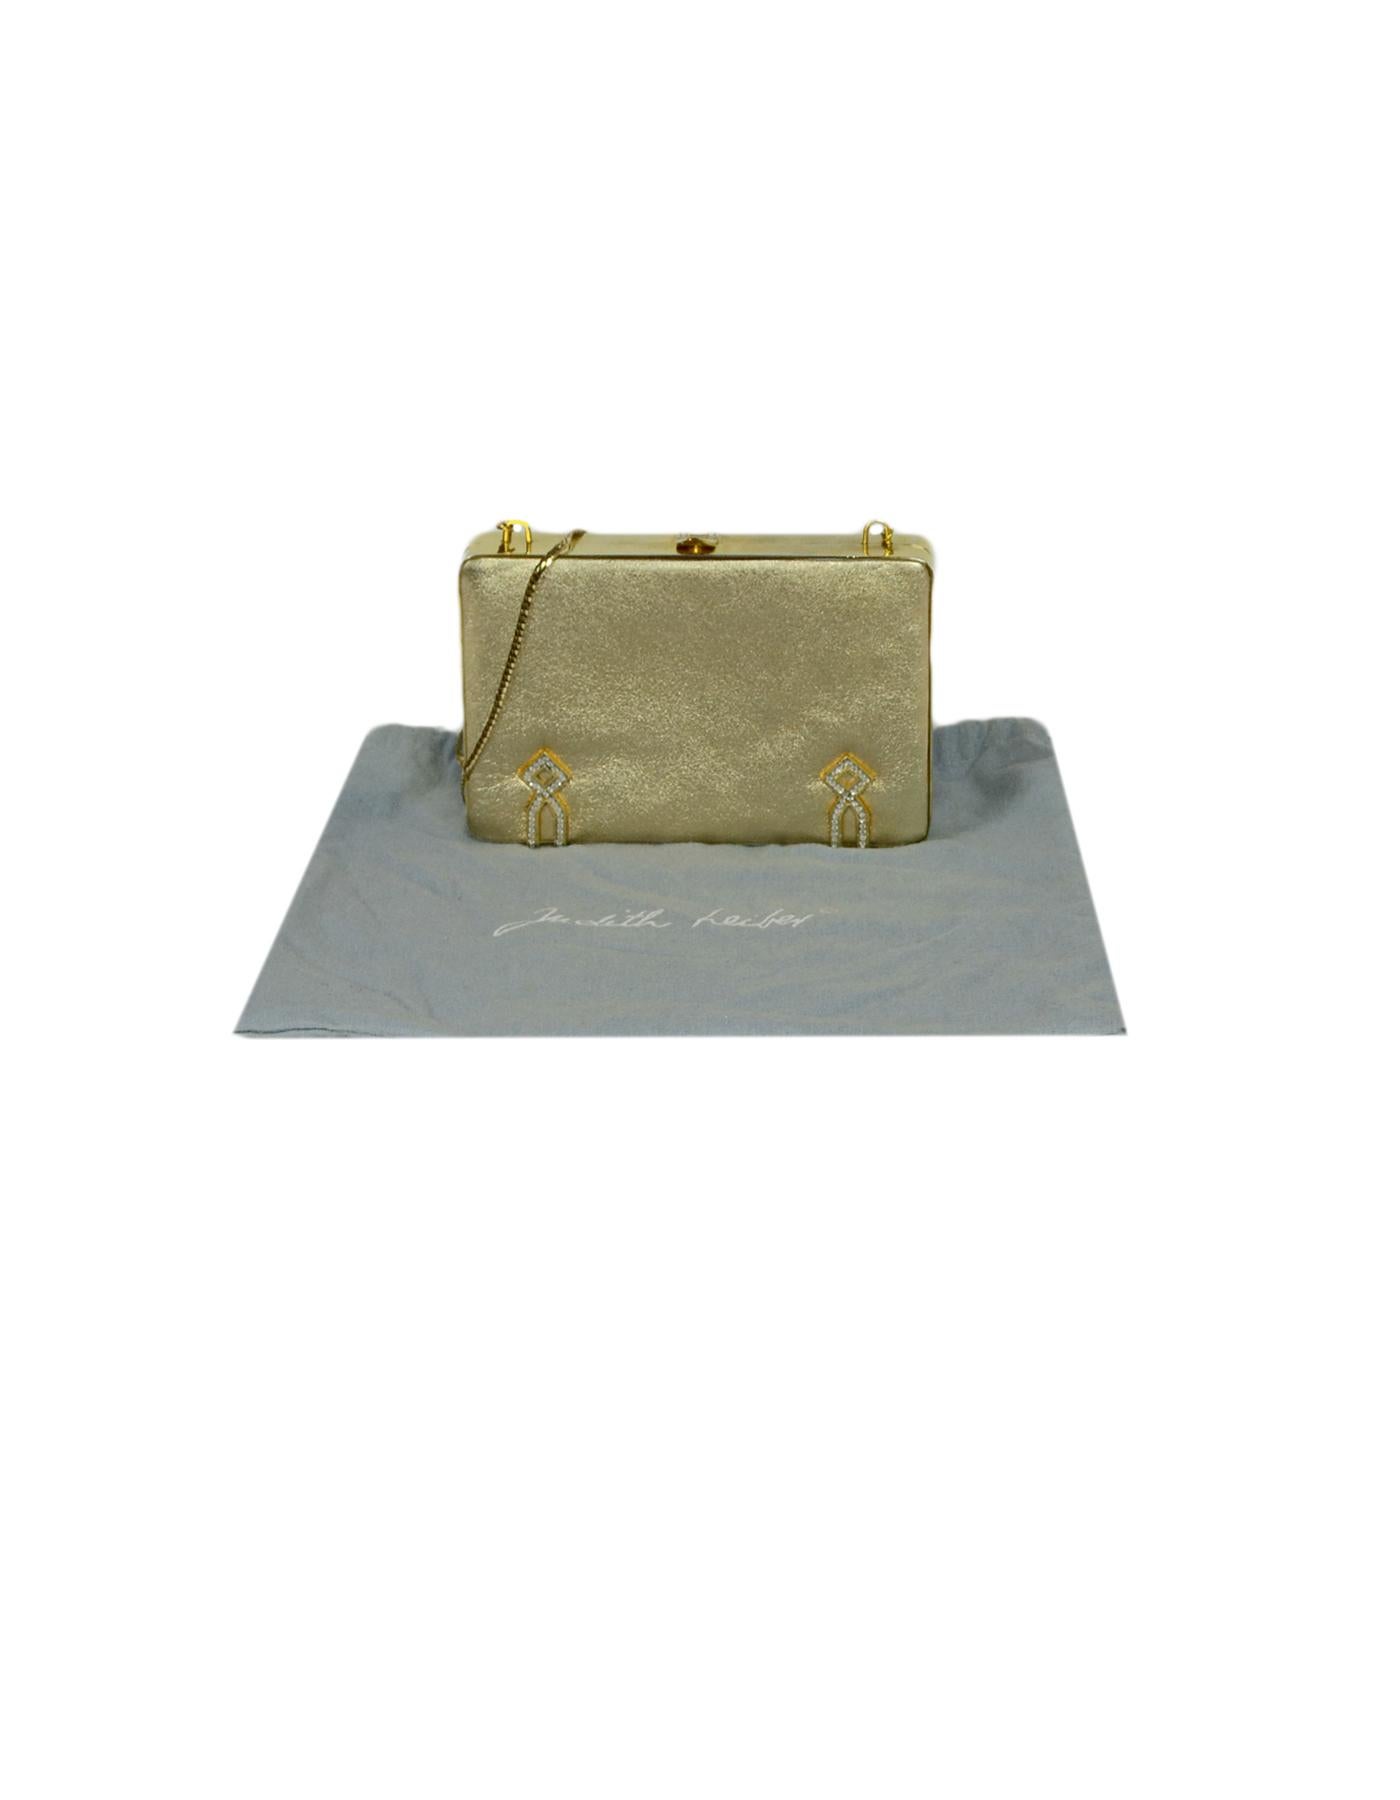 Judith Leiber Gold Leather Miniaudiere Bag with Chain Strap and Crystal Detail 8